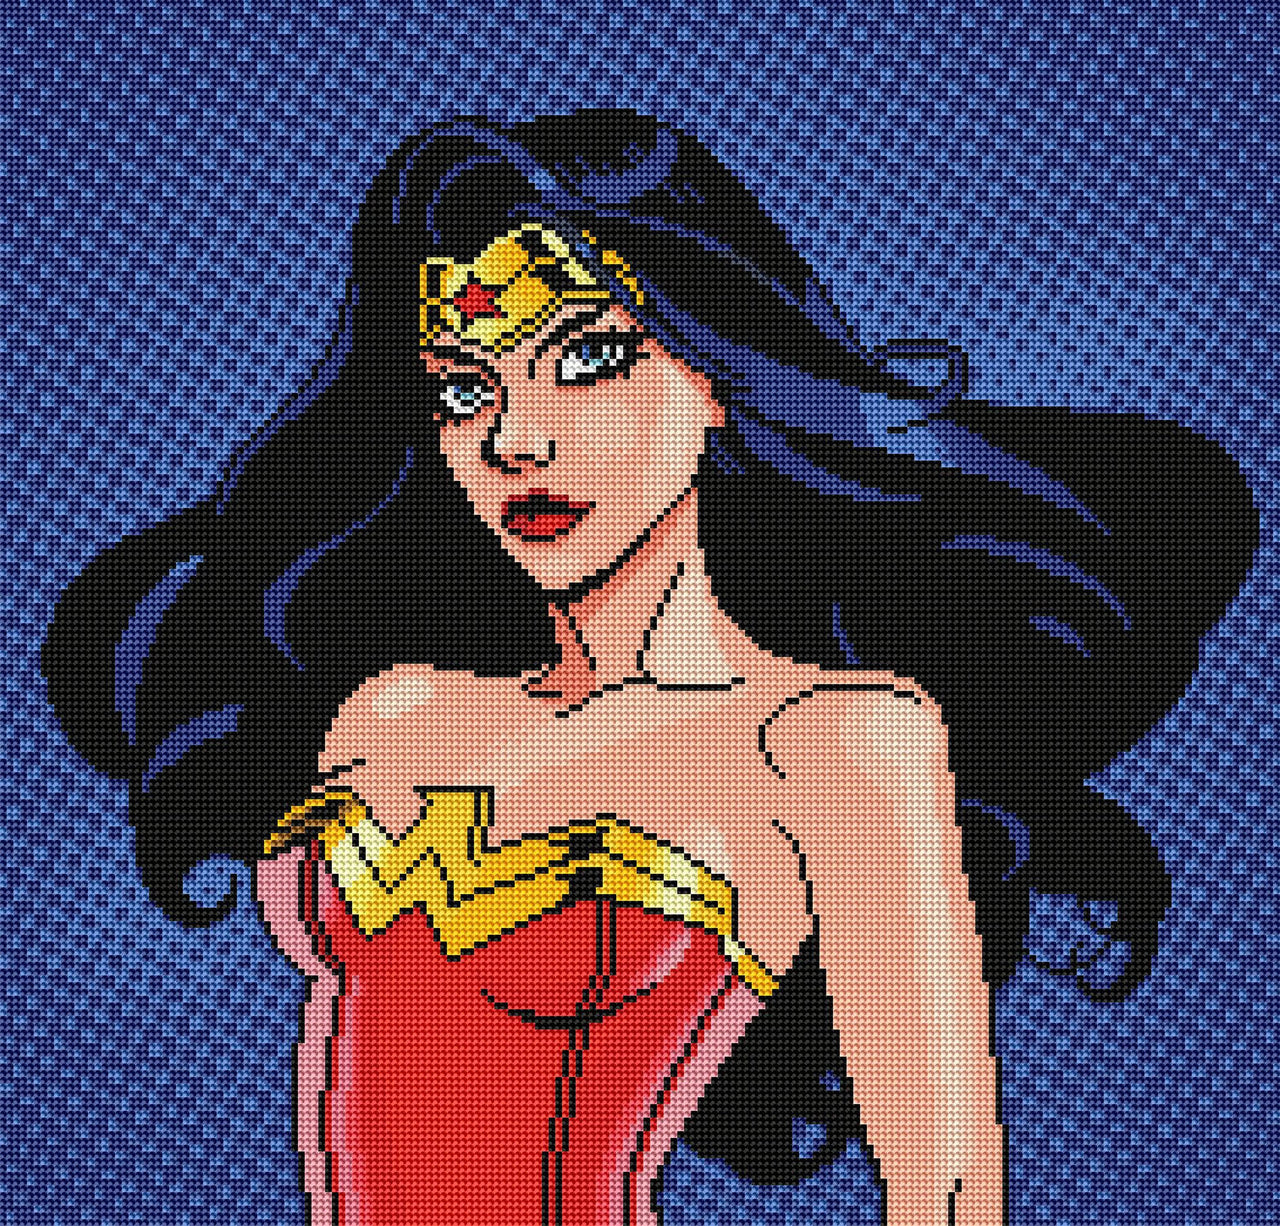 Diamond Painting Wonder Woman Pop Art 21" x 20″ (53cm x 51cm) / Round with 24 Colors including 3 ABs / 34,209